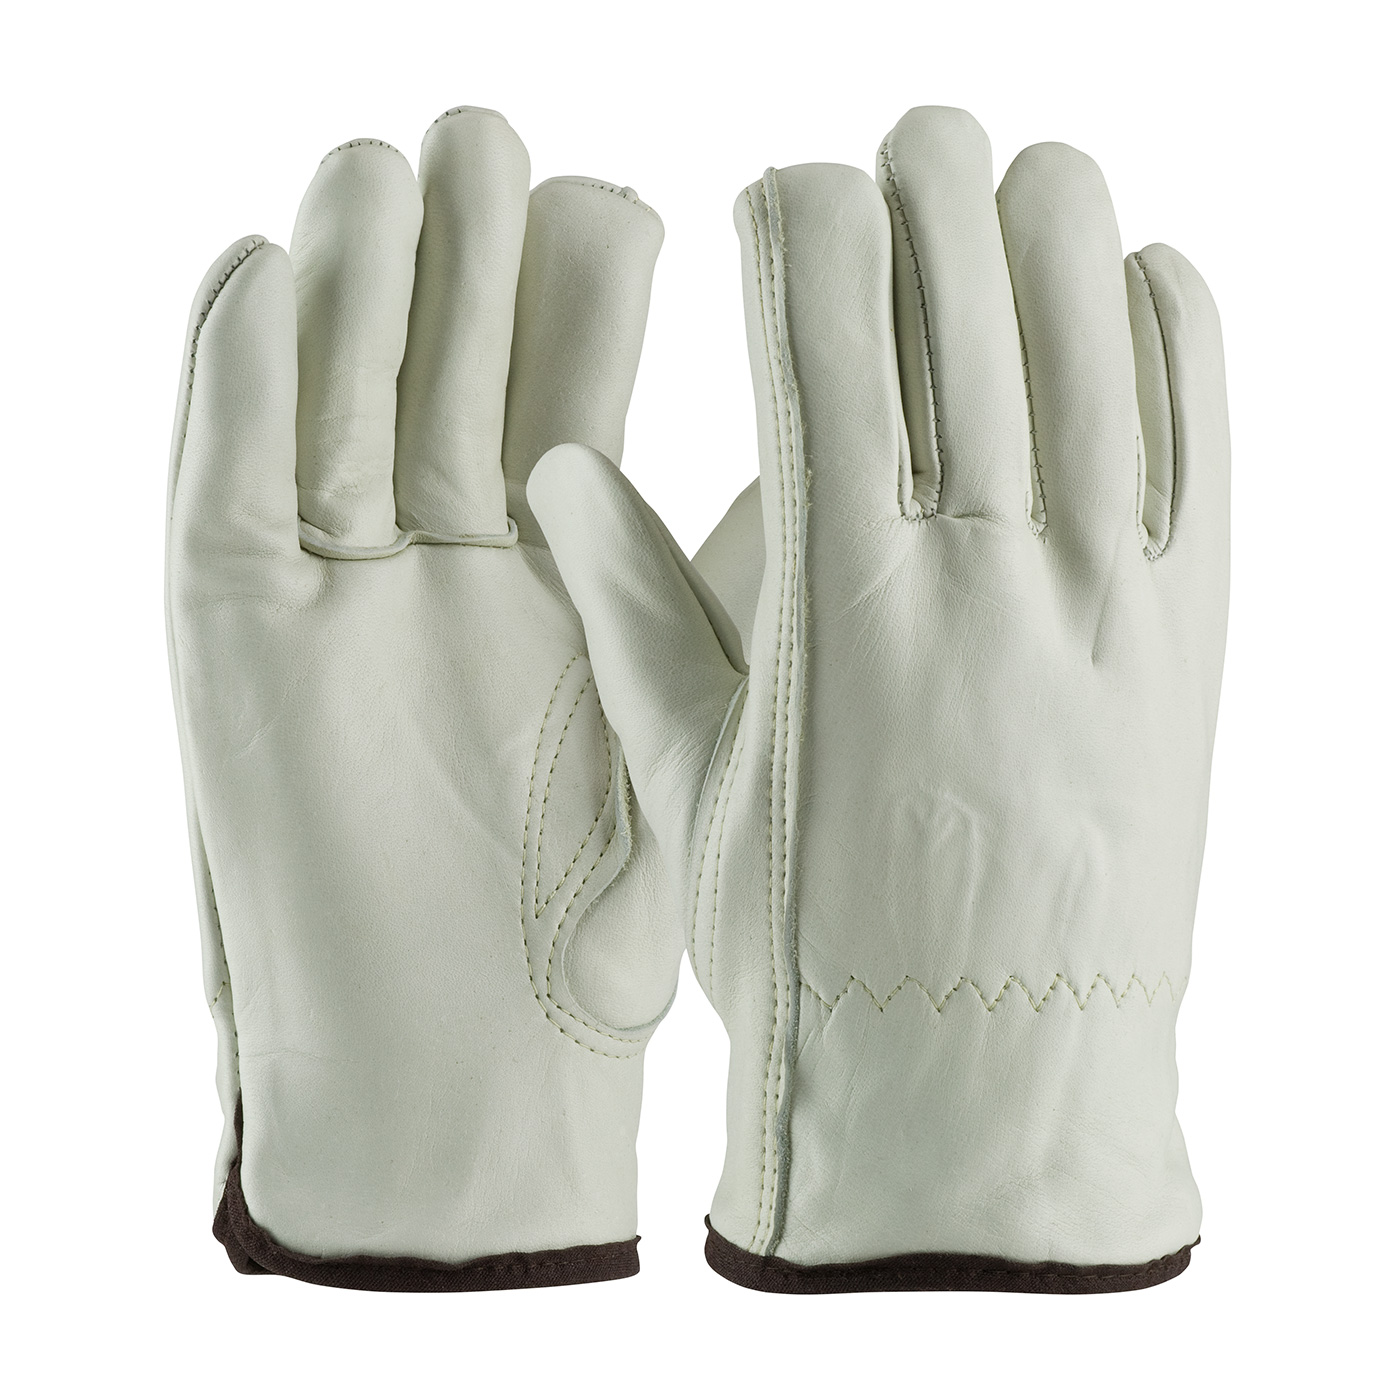 PIP® Premium Grade Top Grain Cowhide Leather Glove with 3M™ Thinsulate™ Lining - Keystone Thumb #77-269